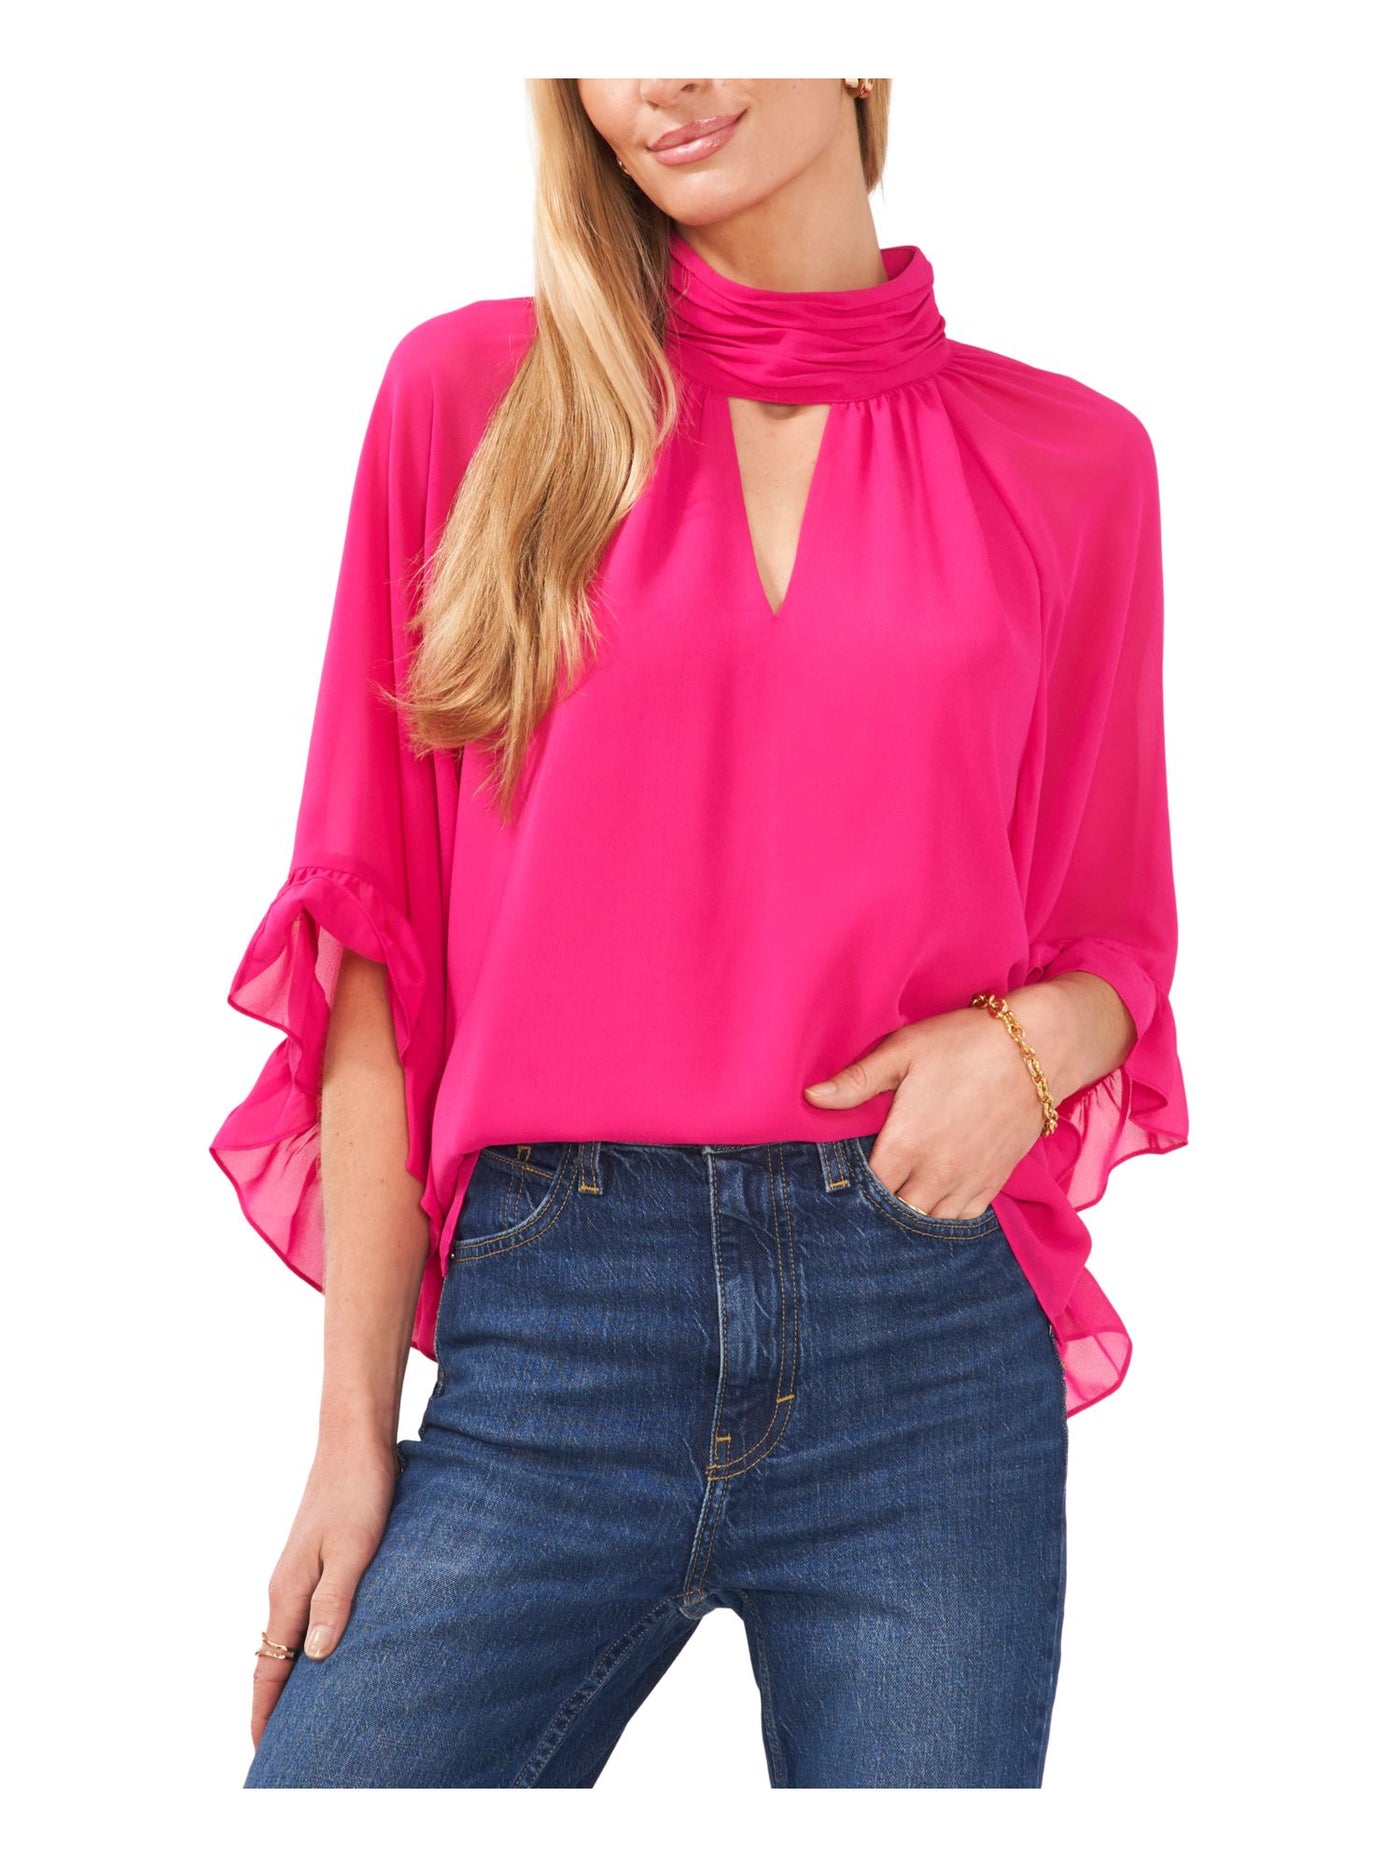 VINCE CAMUTO Womens Pink Ruffled Sheer Cutout Front Keyhole Back Lined 3/4 Sleeve Mock Neck Blouse M